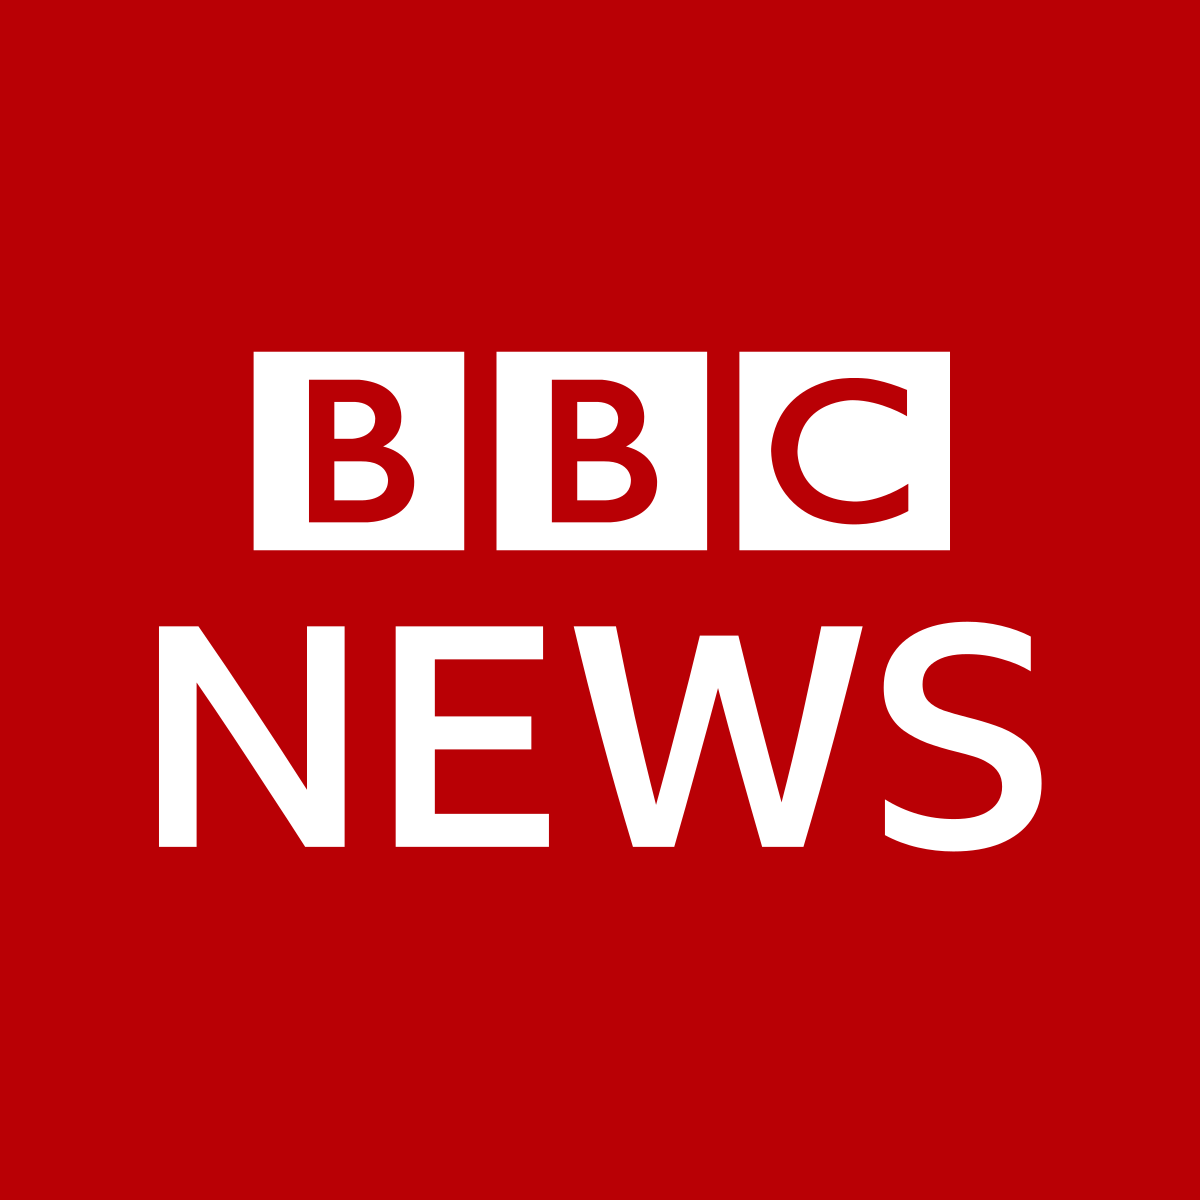 Picture displays red background with white texts that reads: BBC News